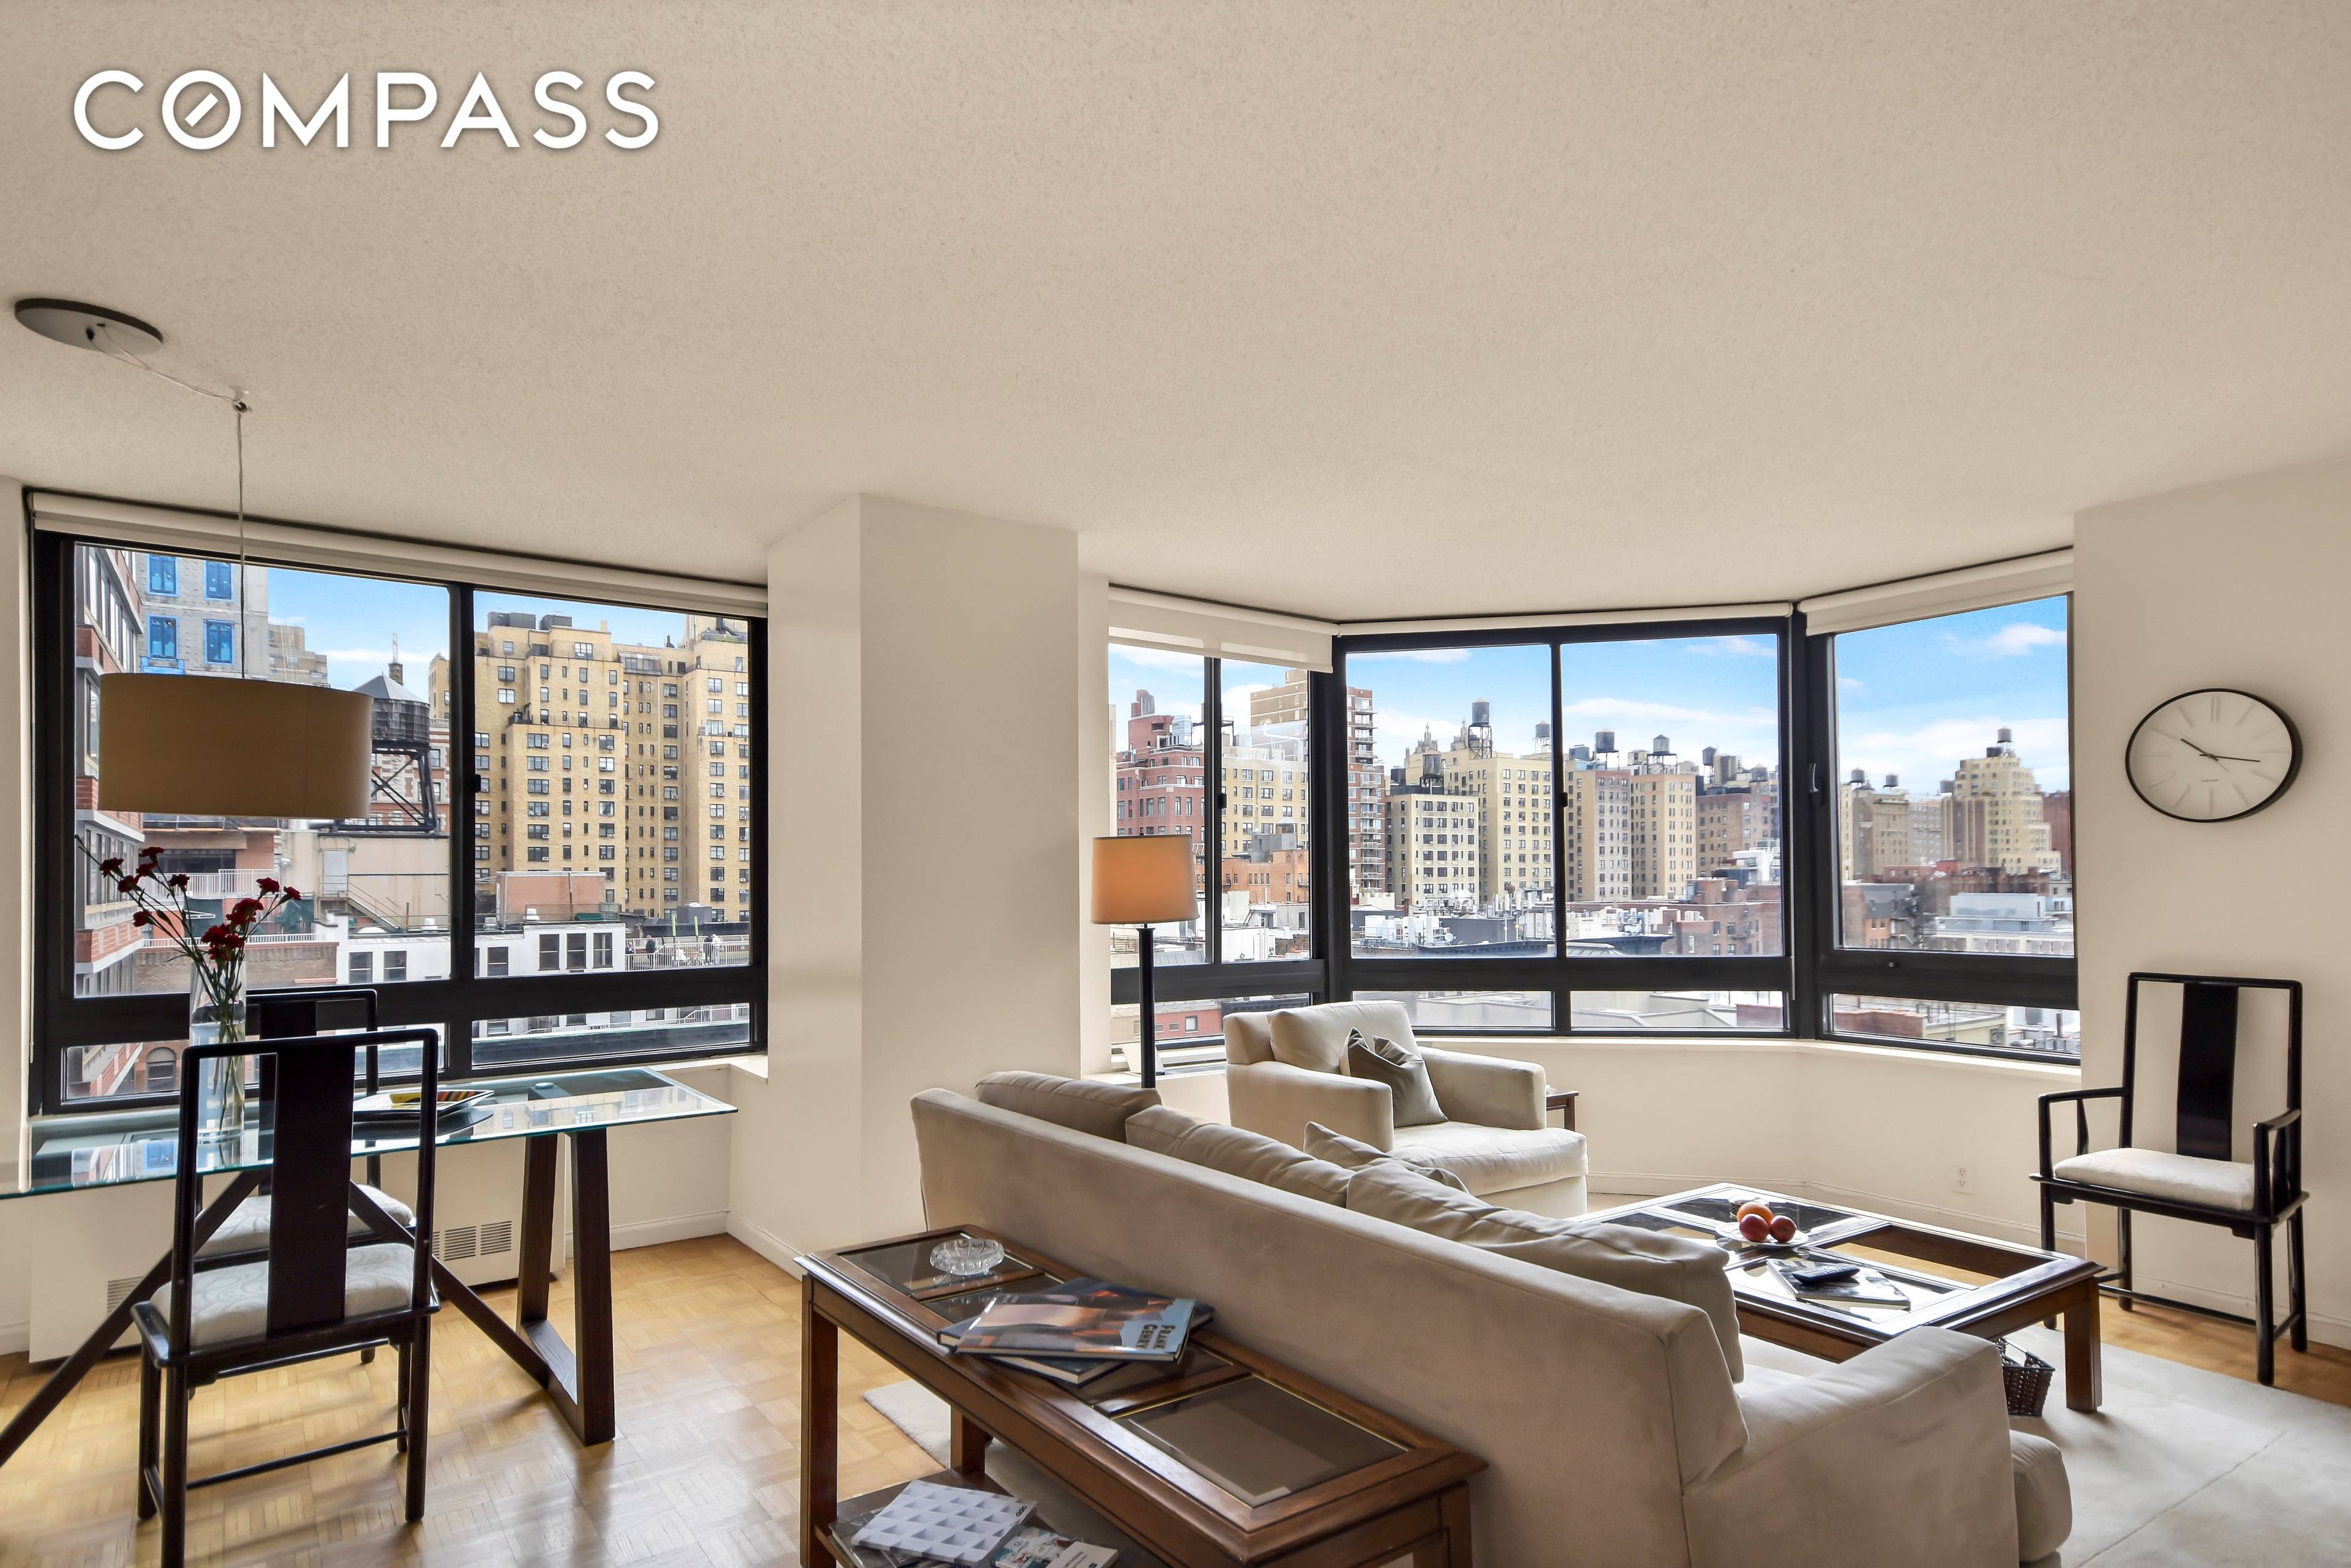 Fully Furnished Only 12 Month Lease Sun filled, Spacious, one bedroom apartment at The Bromley Condominium, one of the most desired Upper West Side locations.